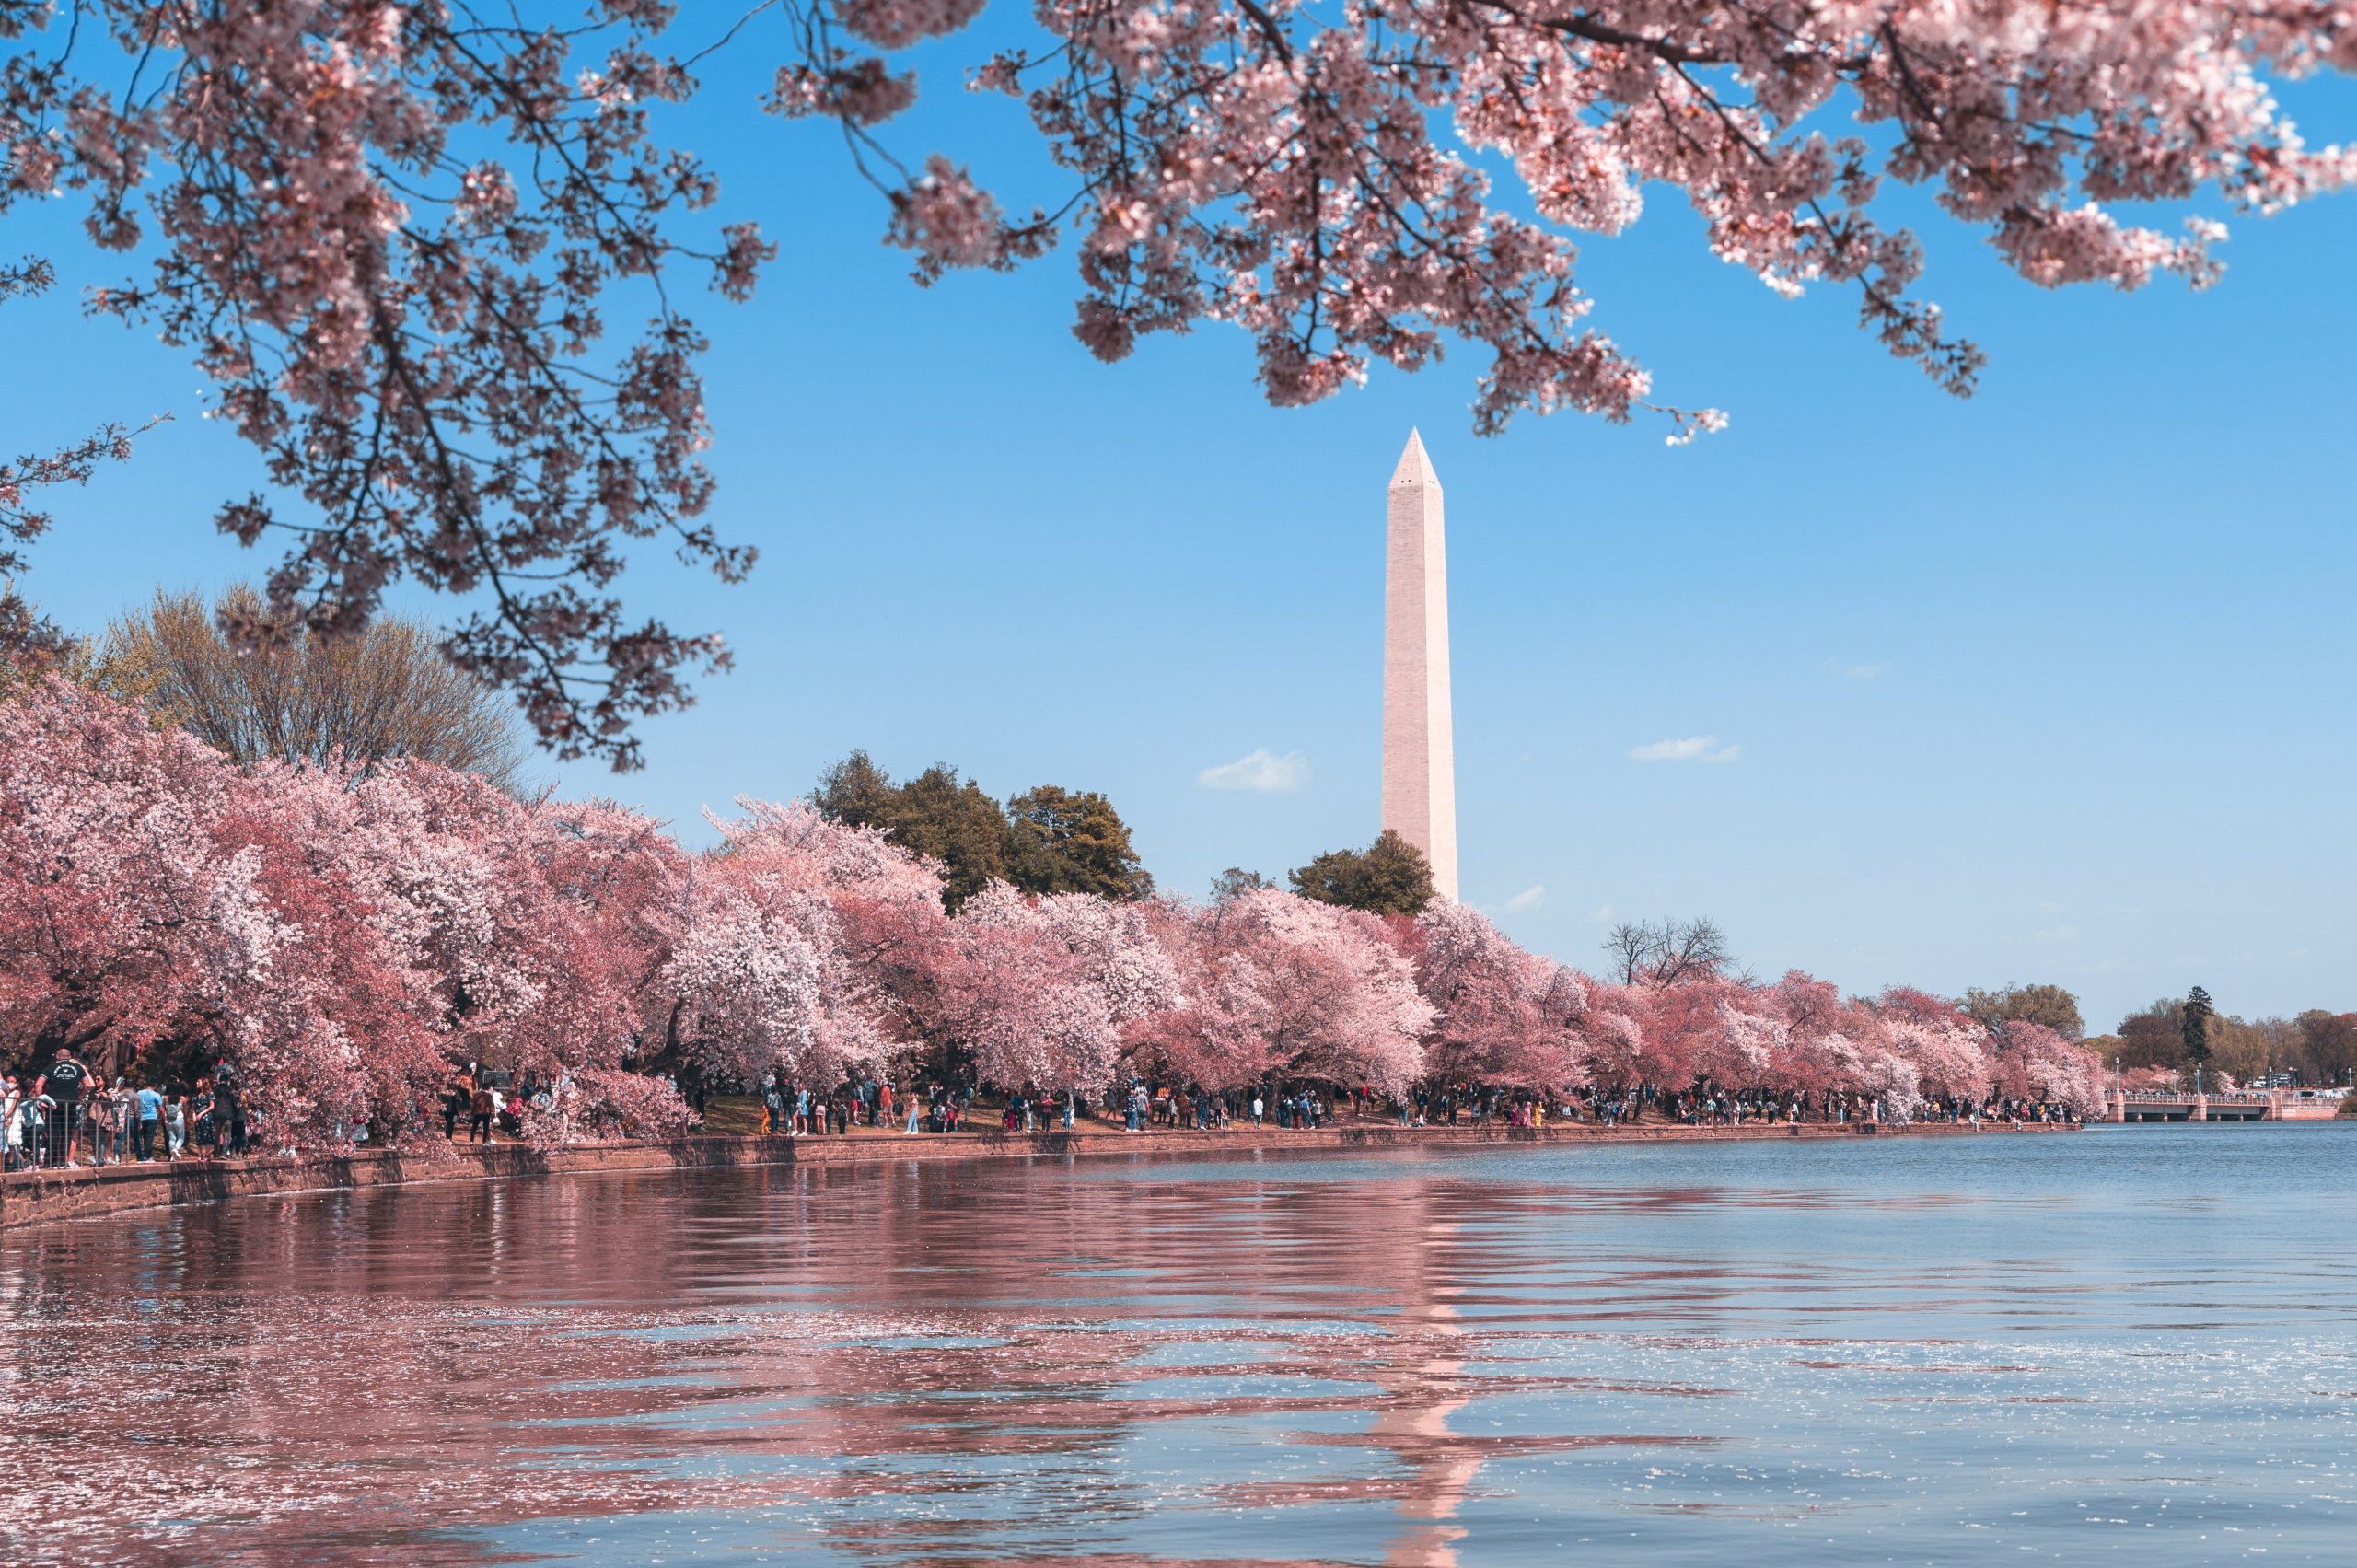 visit the USA in the spring